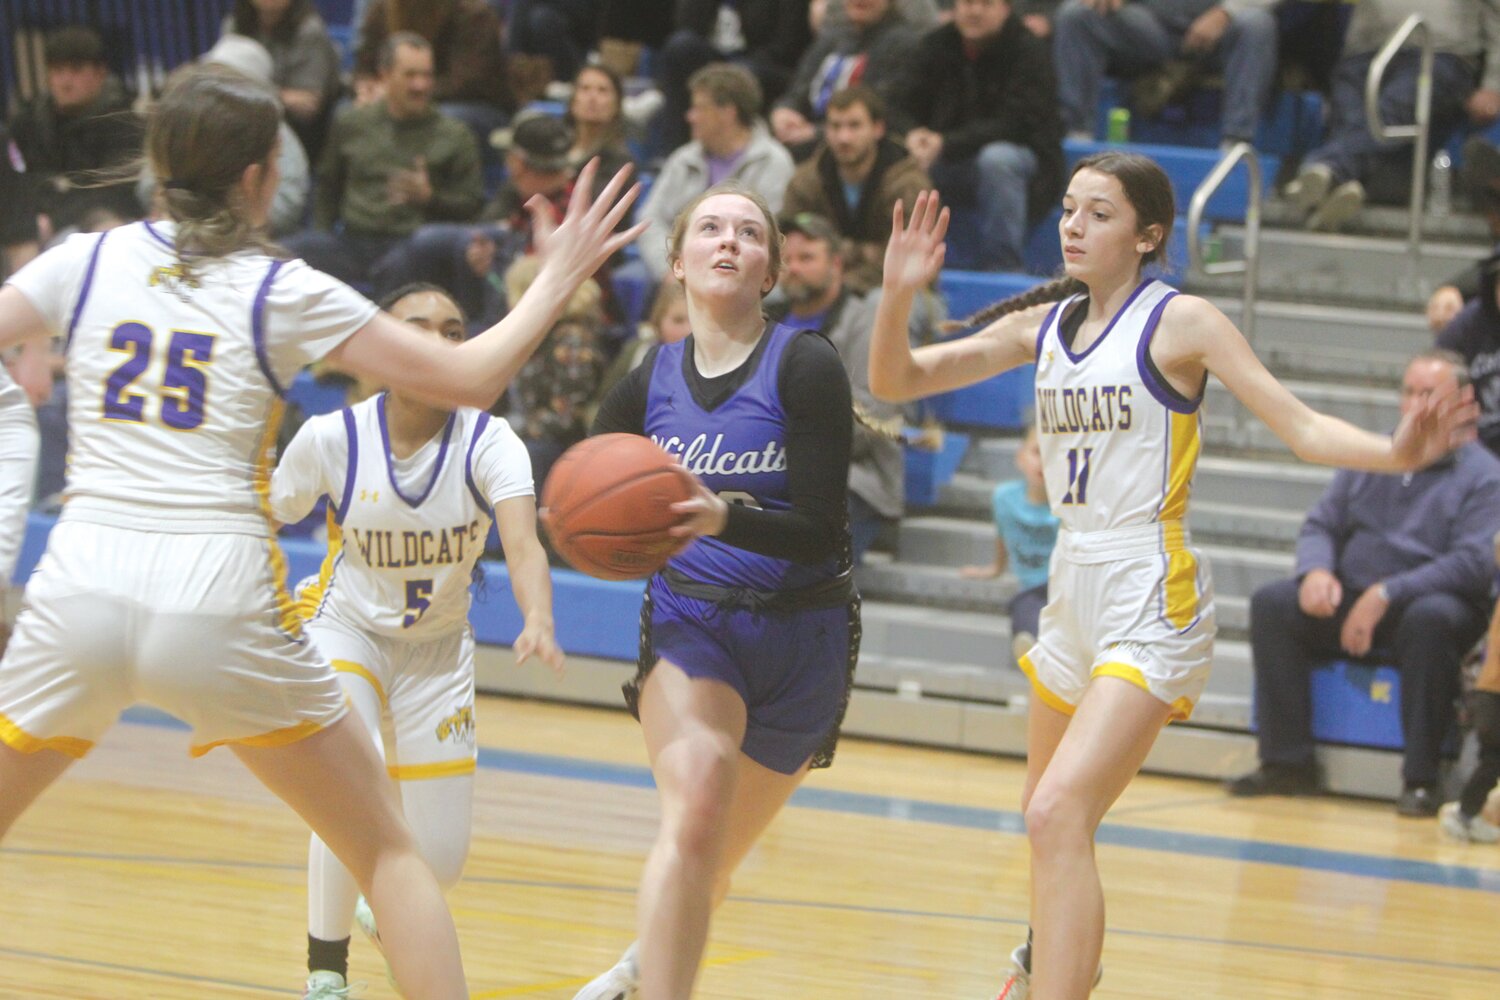 Montgomery County senior Madi Polston drives to the basket against Wright City on Jan. 18. She finished with 10 points to lead the Wildcats to an 82-24 win.